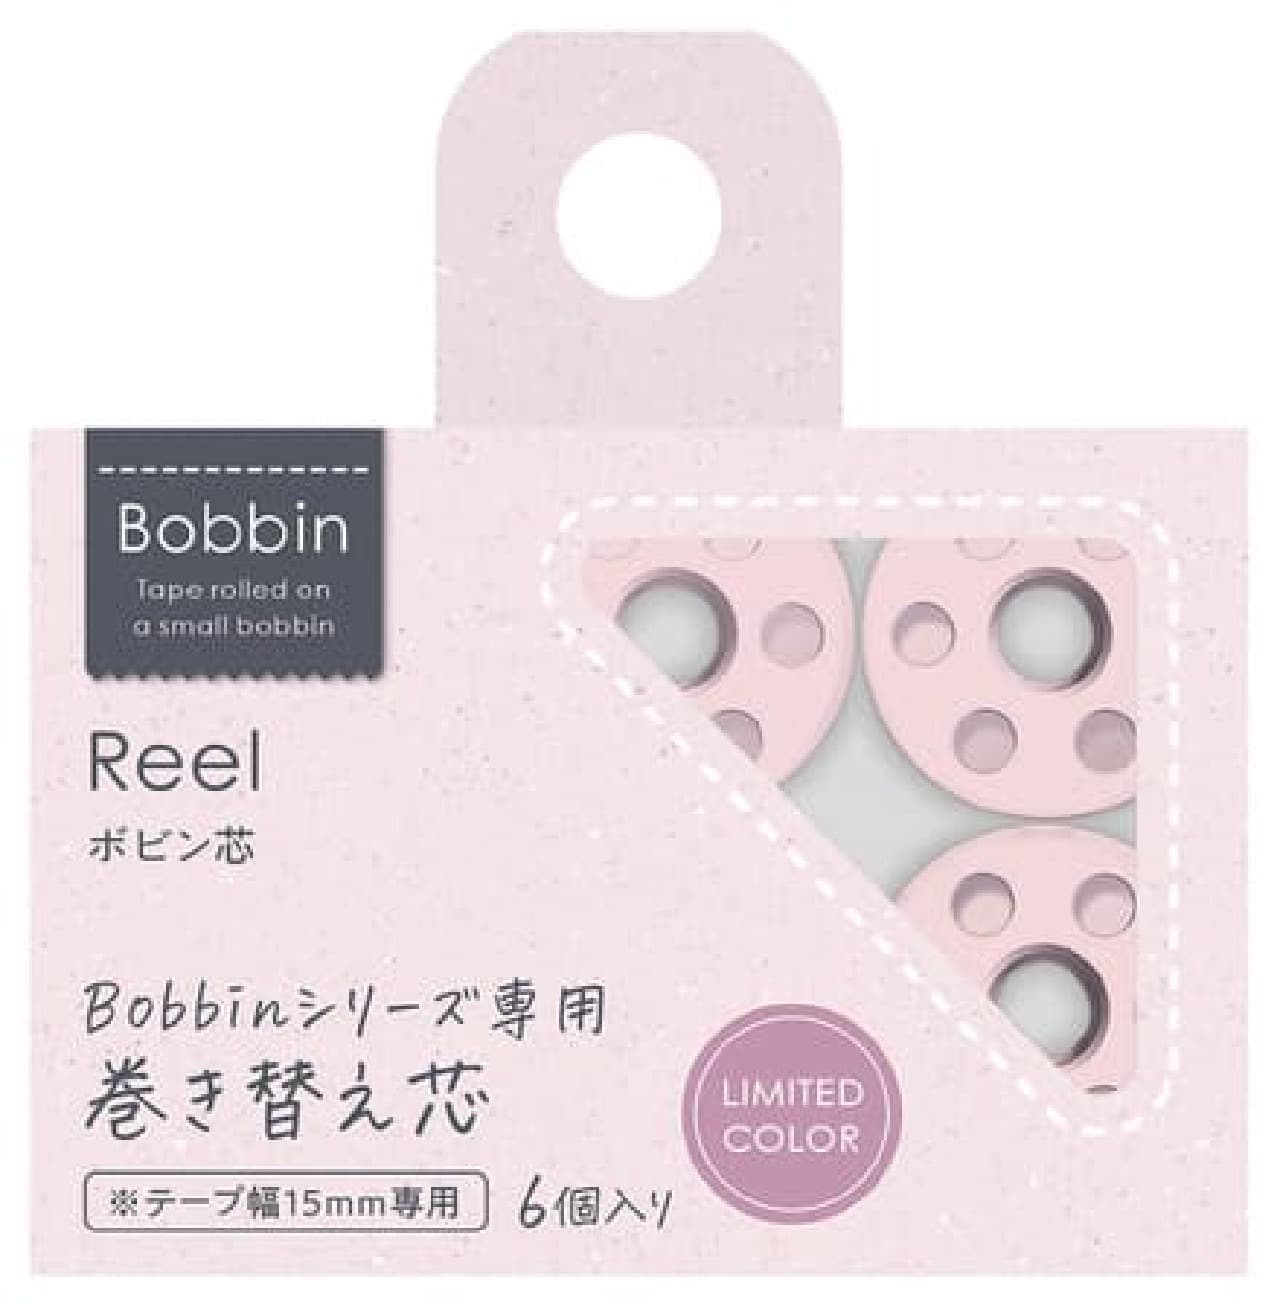 Maste series "Bobbin" limited color release --Tool set with cute dull pink & bobbin core